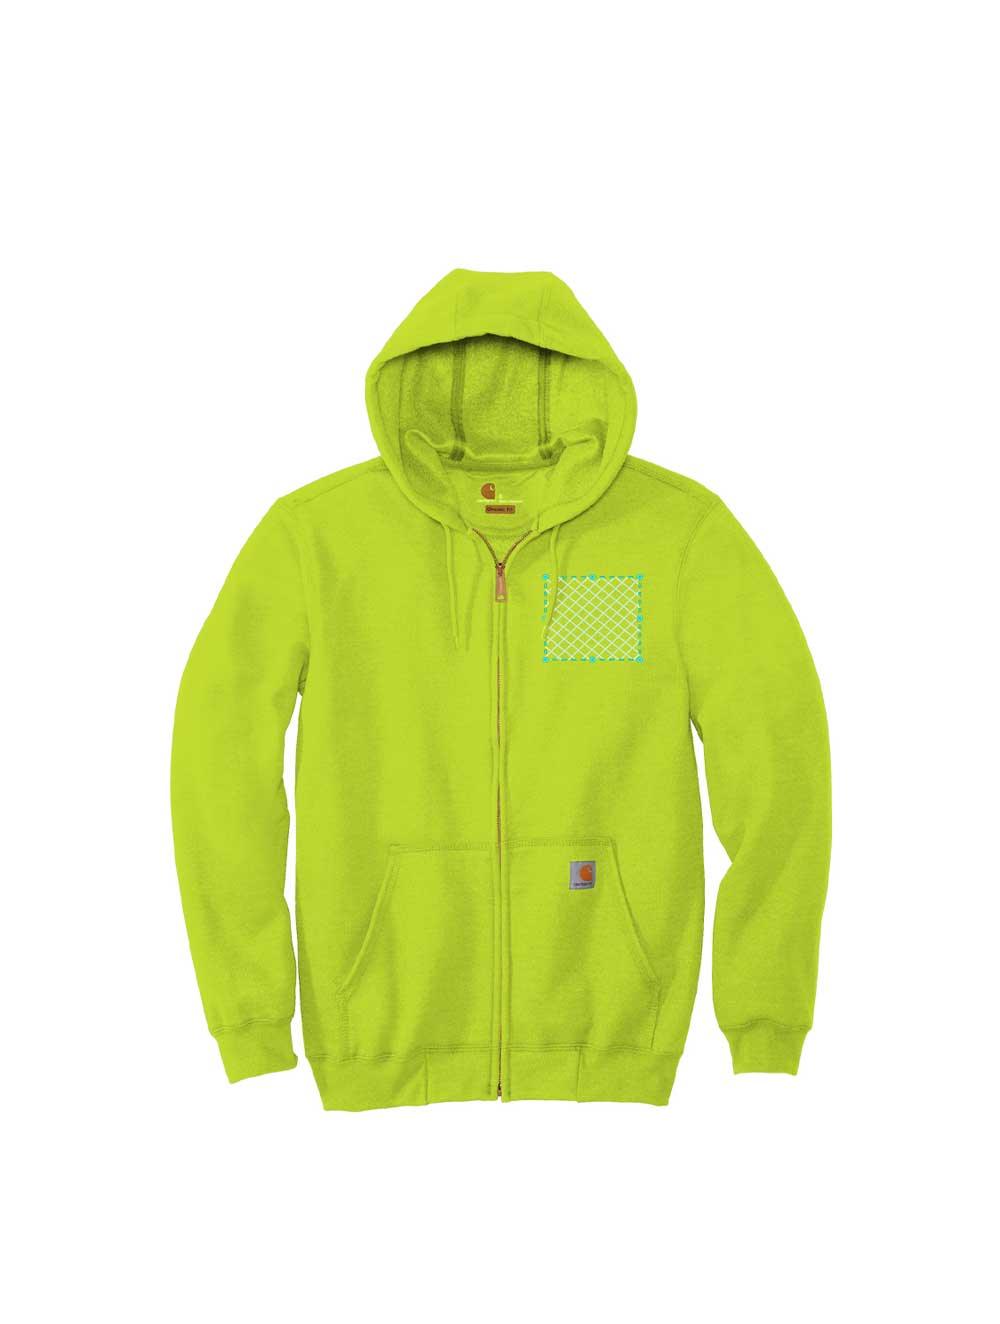 Embroidered Carhartt ® Midweight Hooded Zip-Front Sweatshirt - Constantly Create Shop